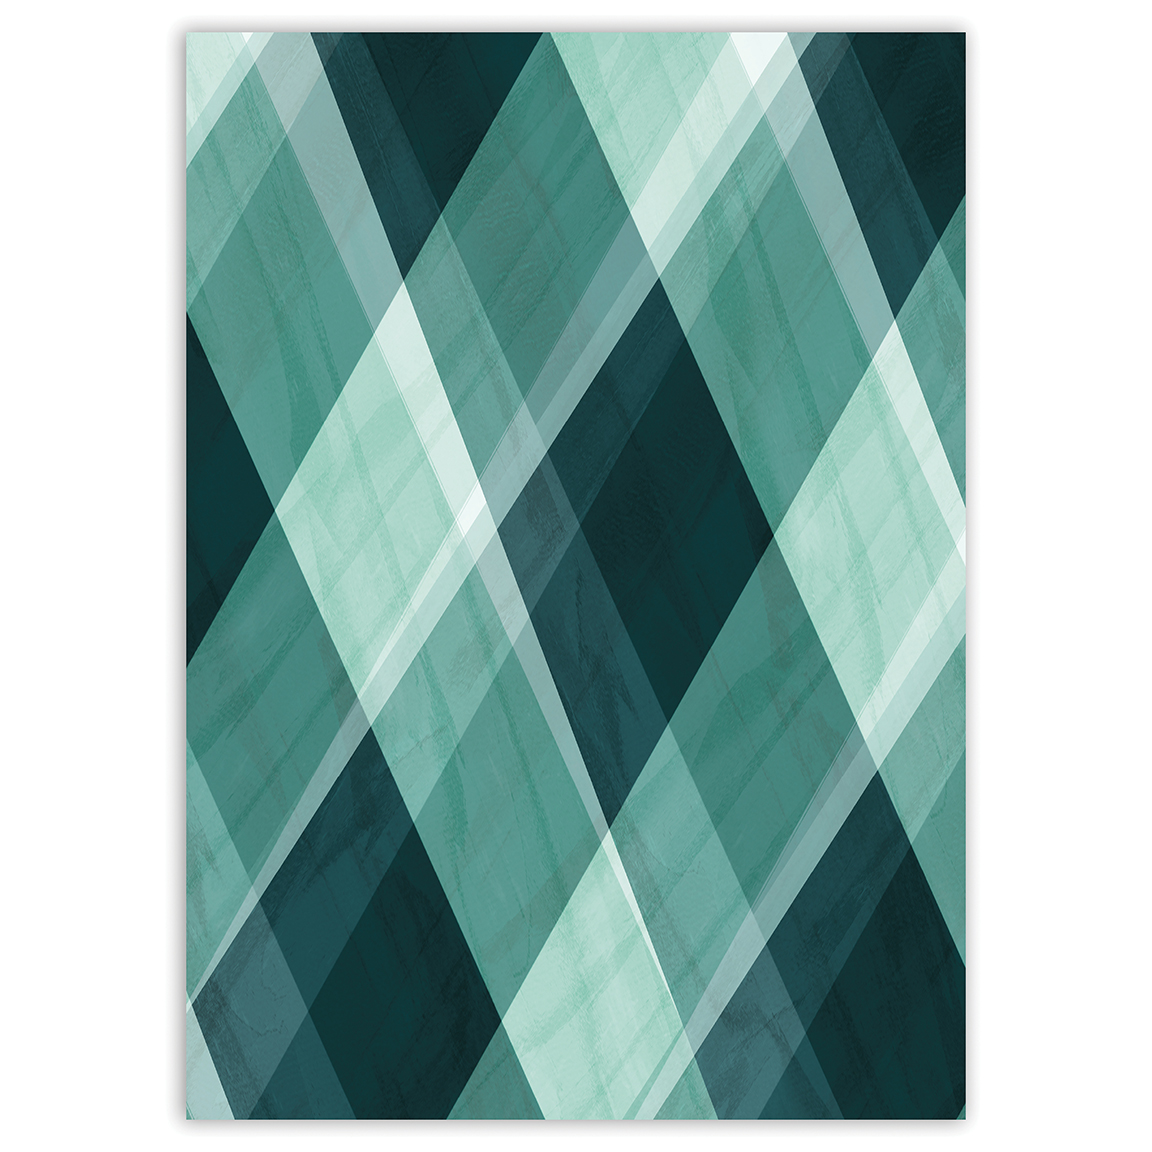 Different shades of blue, plaid wrapping paper